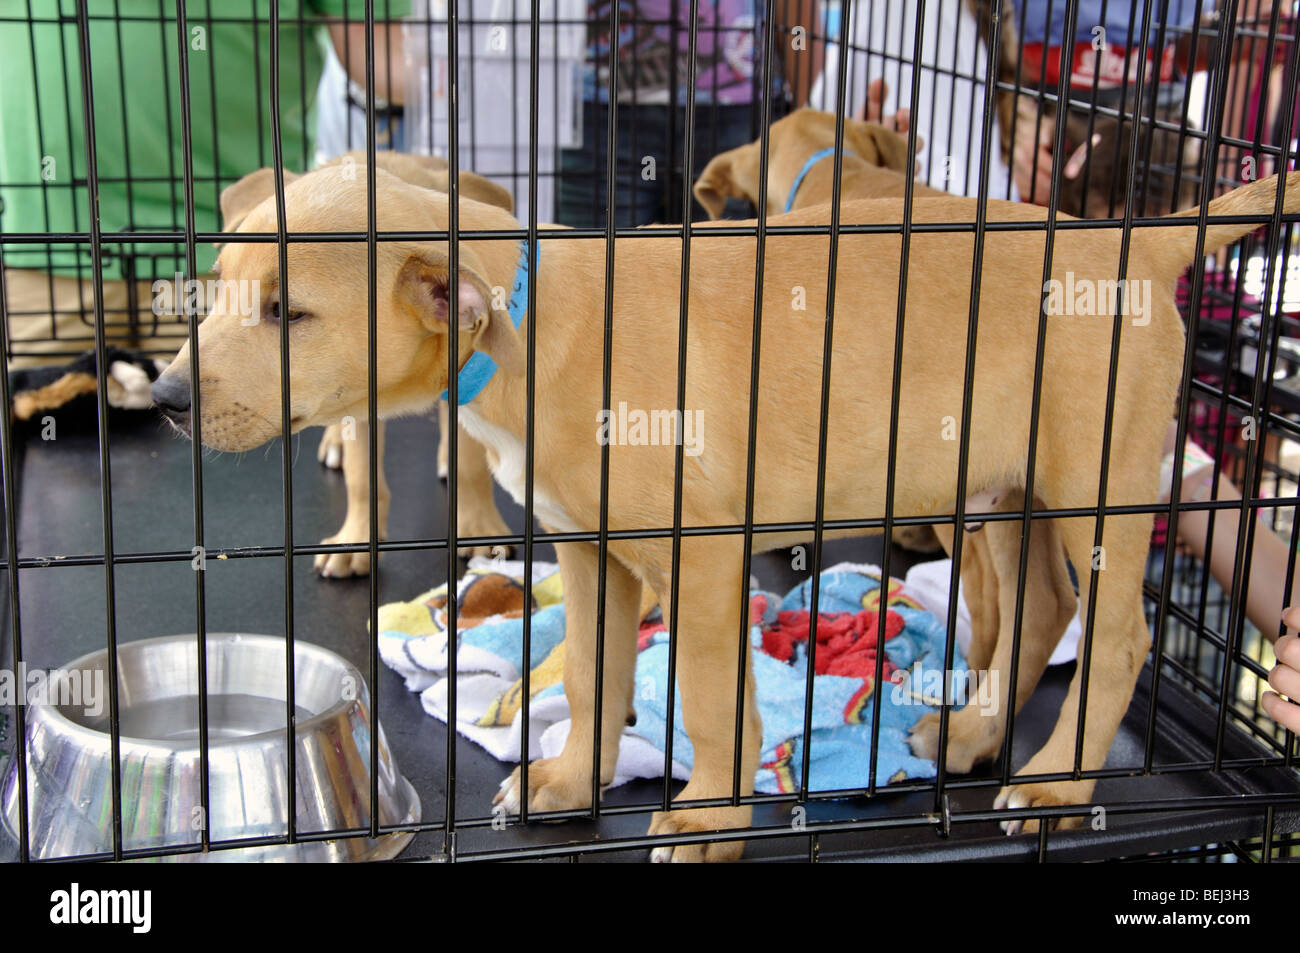 Dog in cage for adoption Stock Photo